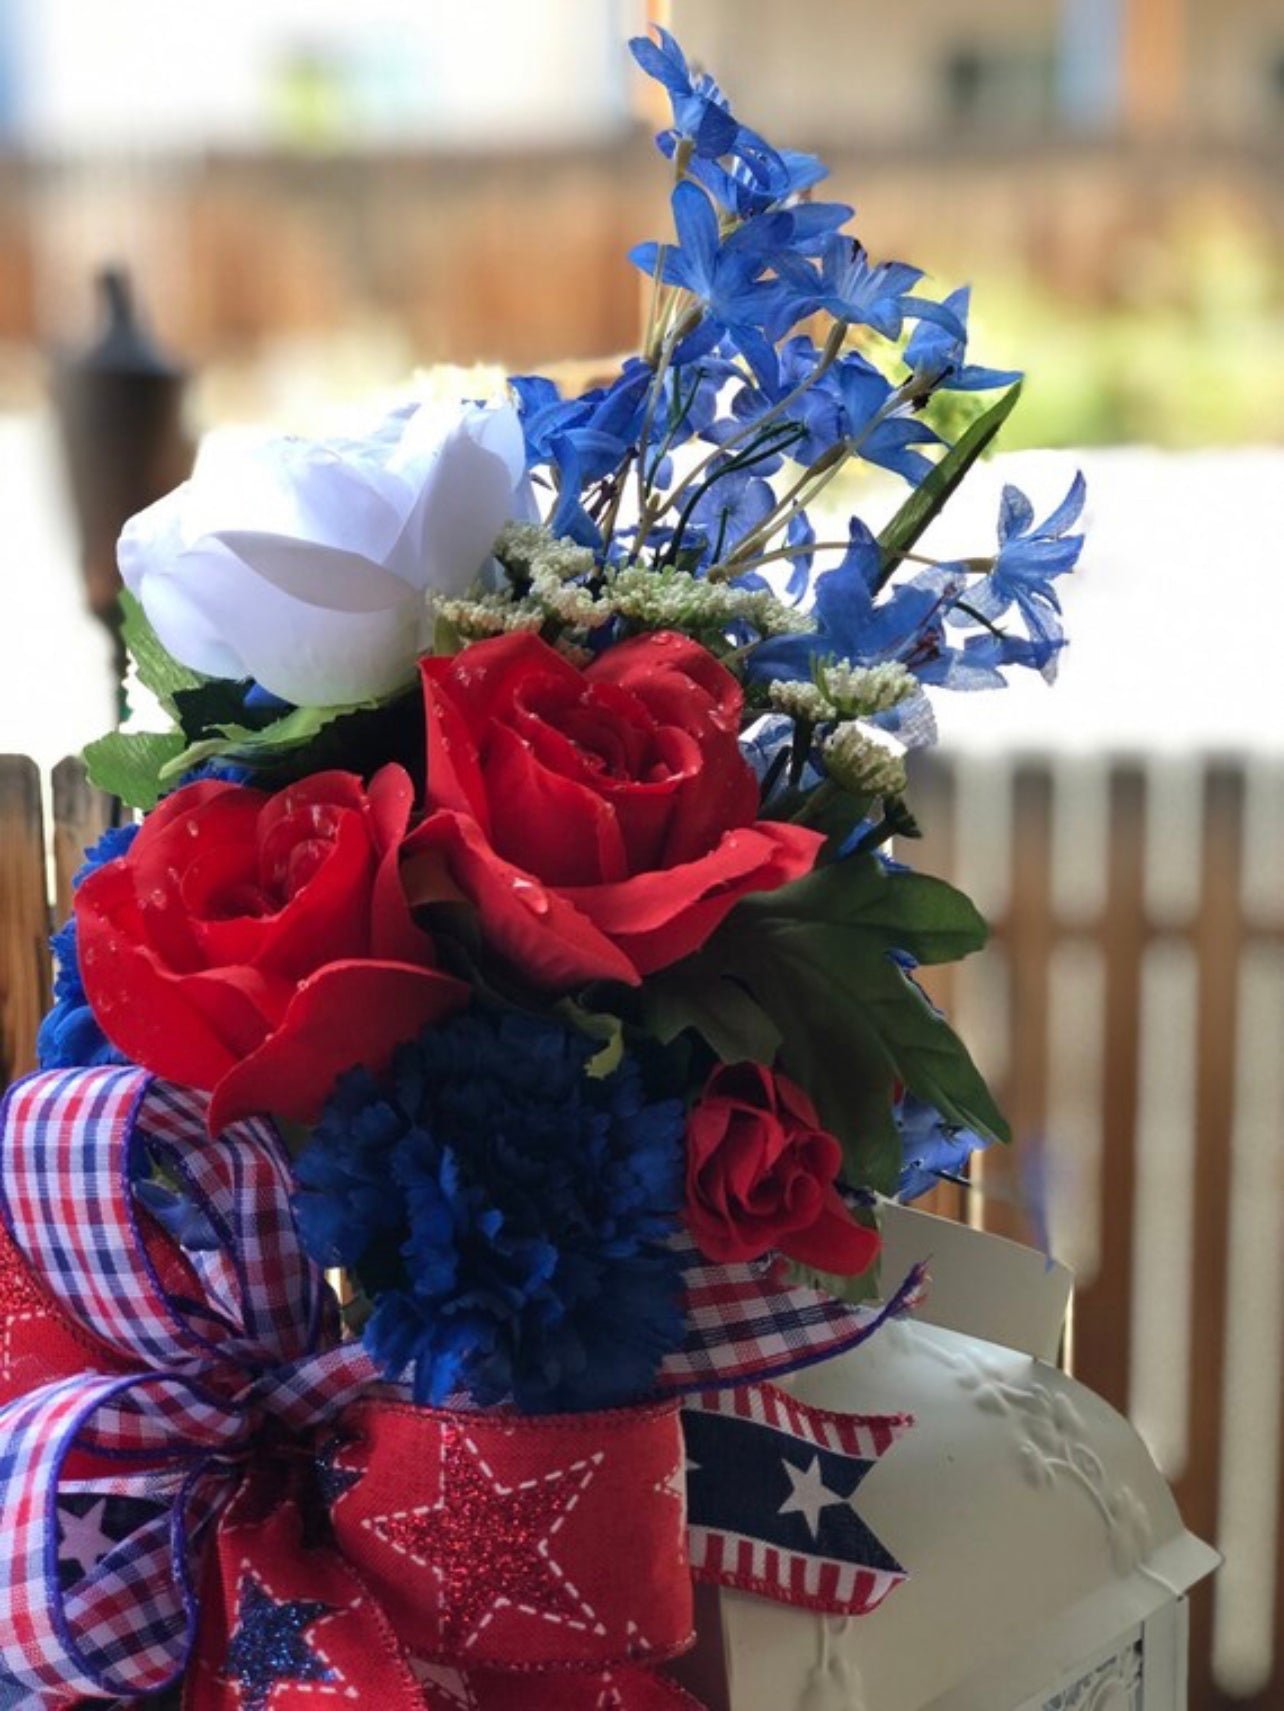 Close Up Details of Red and White Roses, with Blue Cornflowers